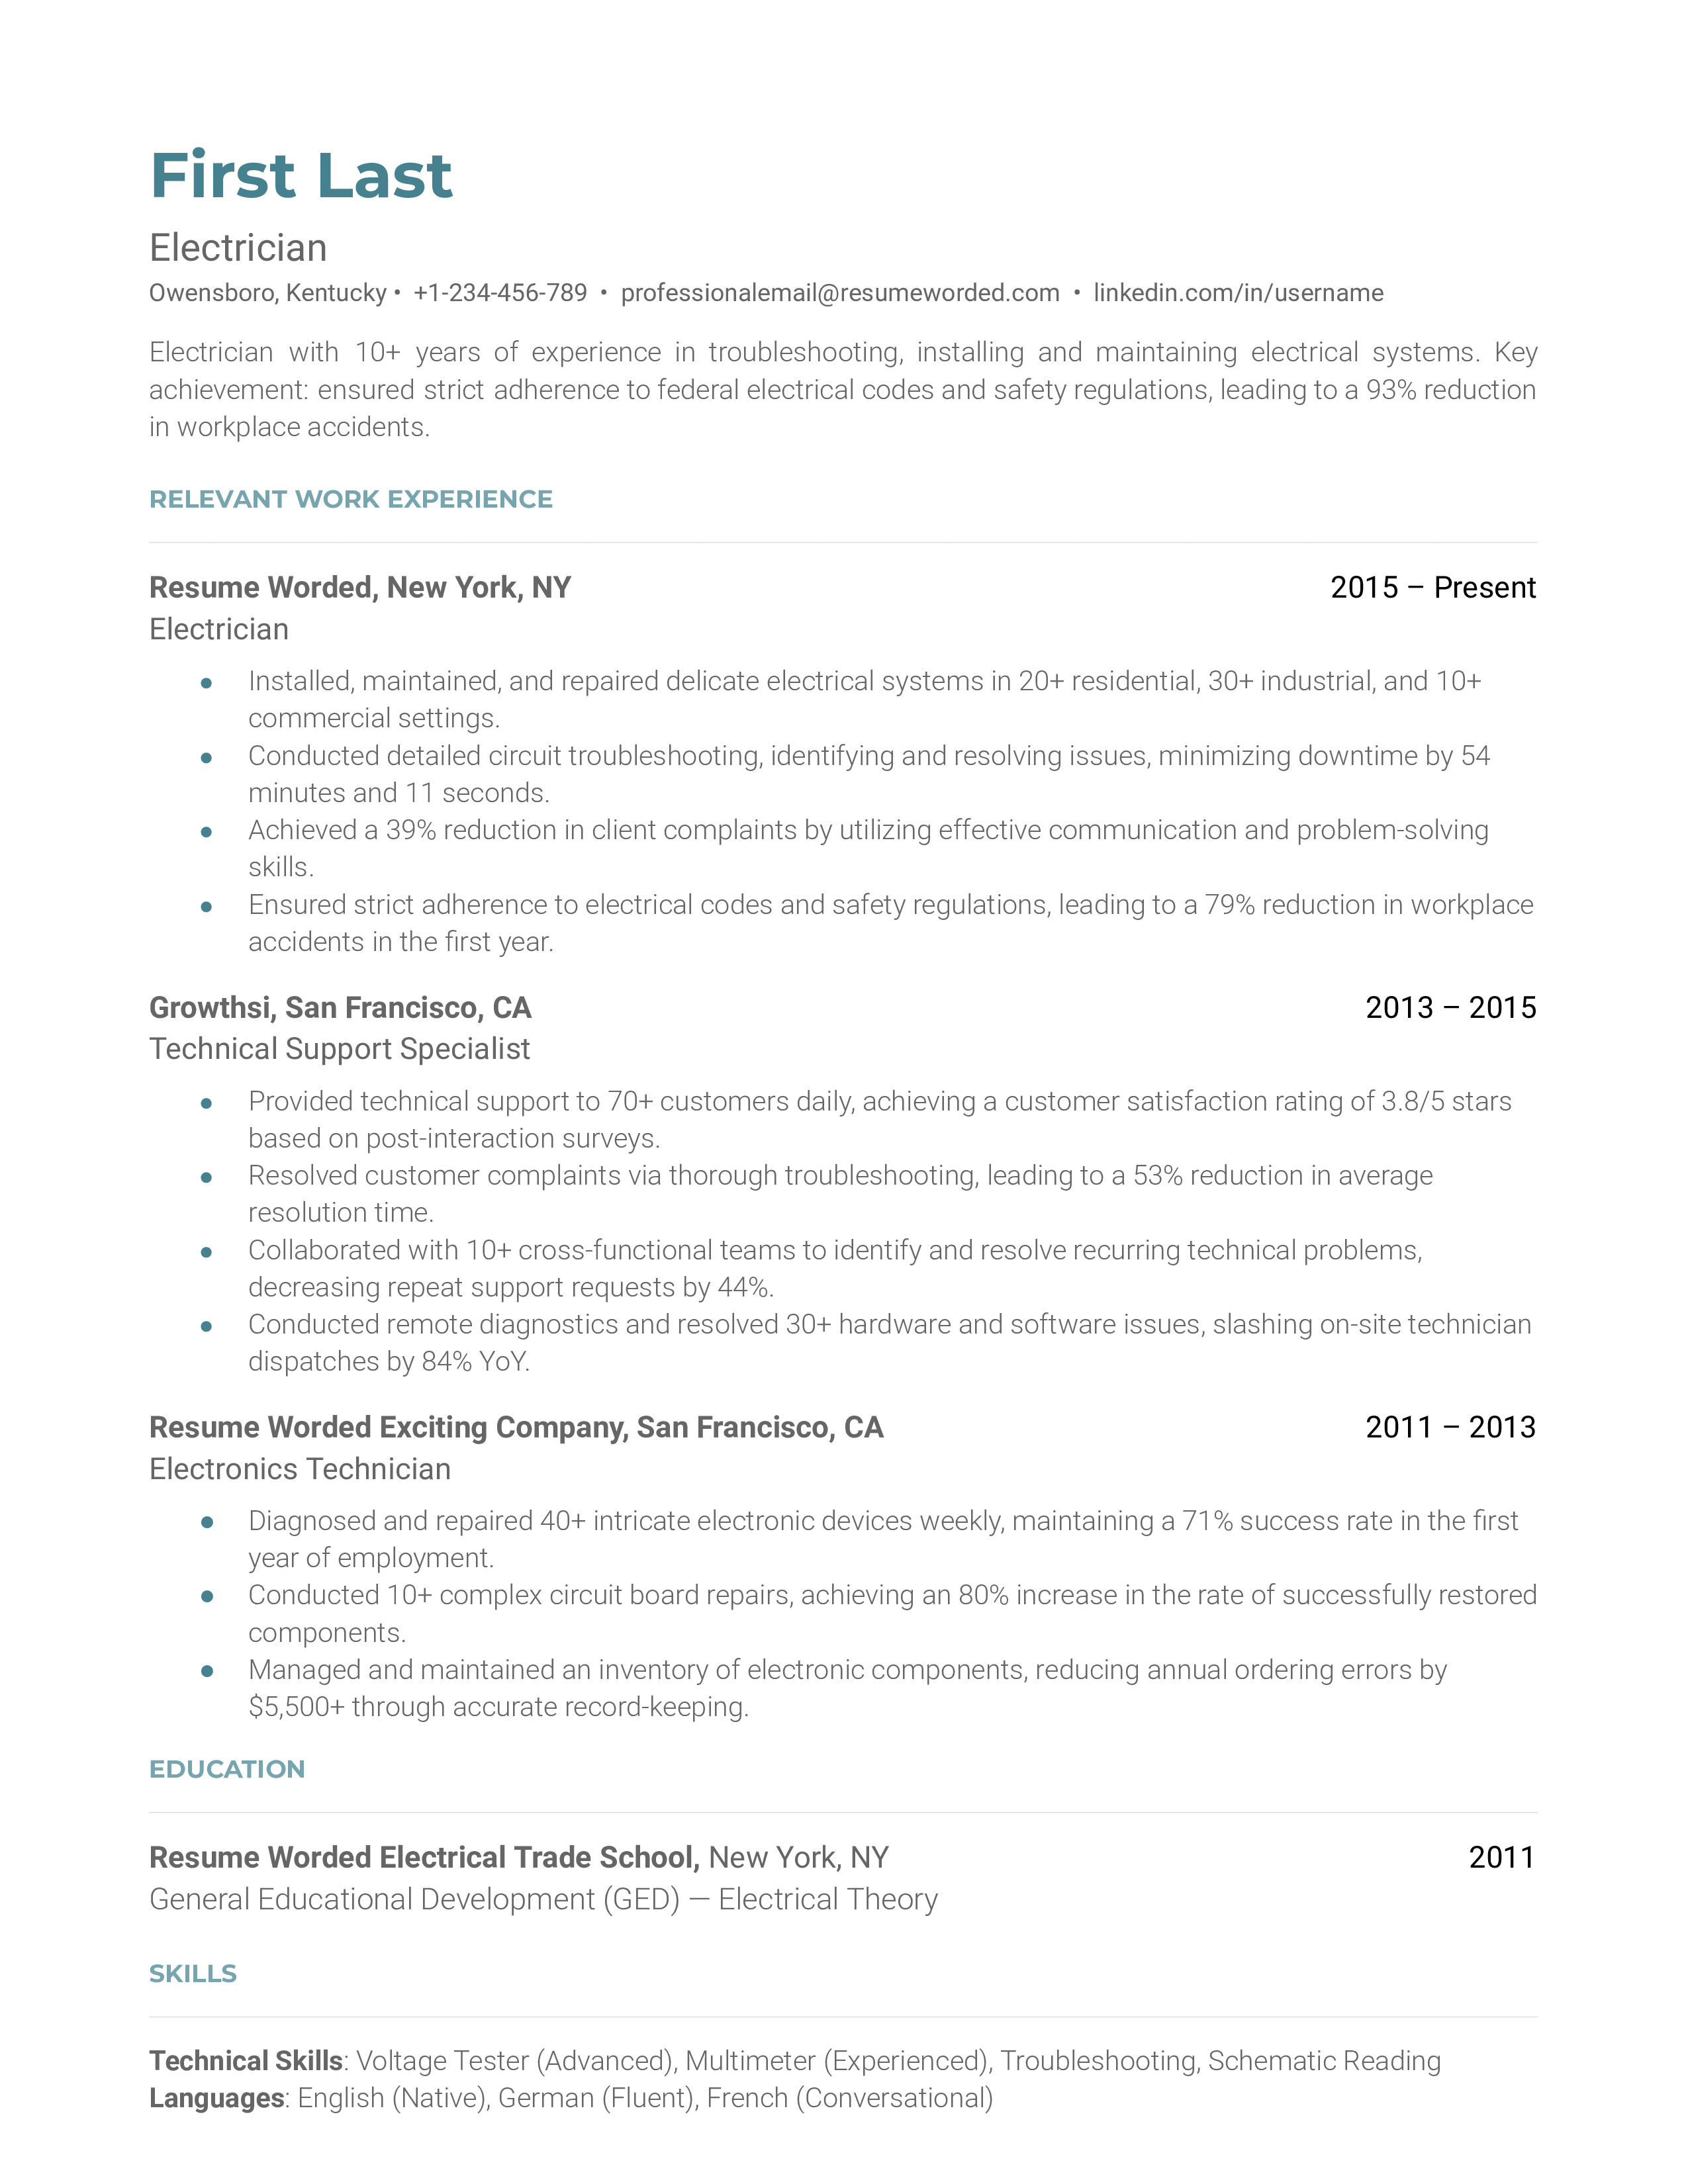 Electrician's CV showcasing work experience, certifications, and problem-solving skills.